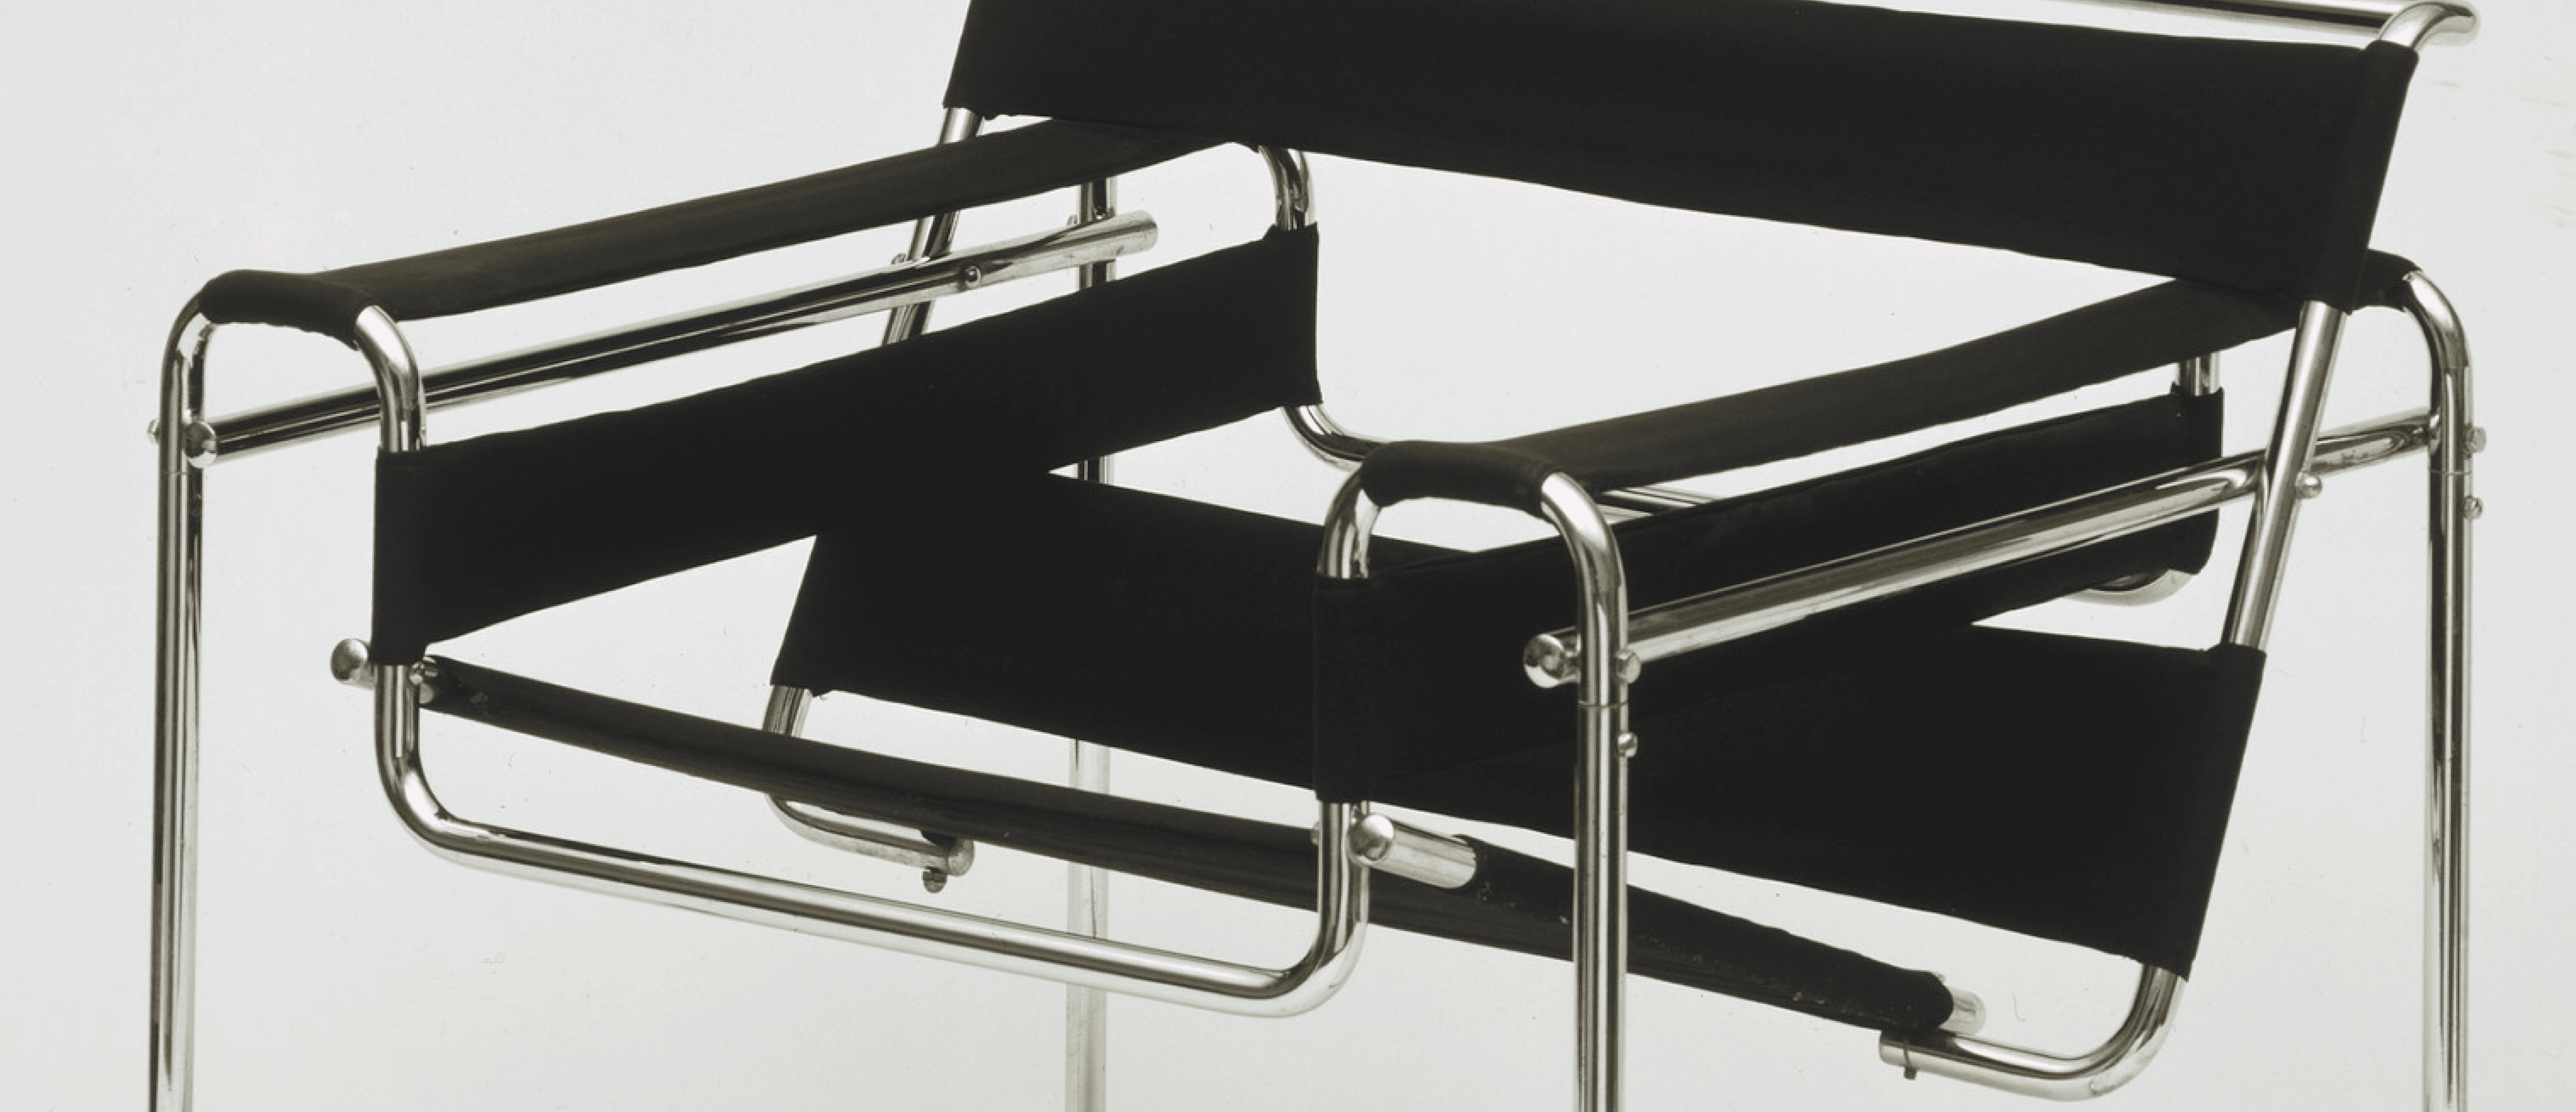  Marcel Breuer’s Wassily Chair icon category image